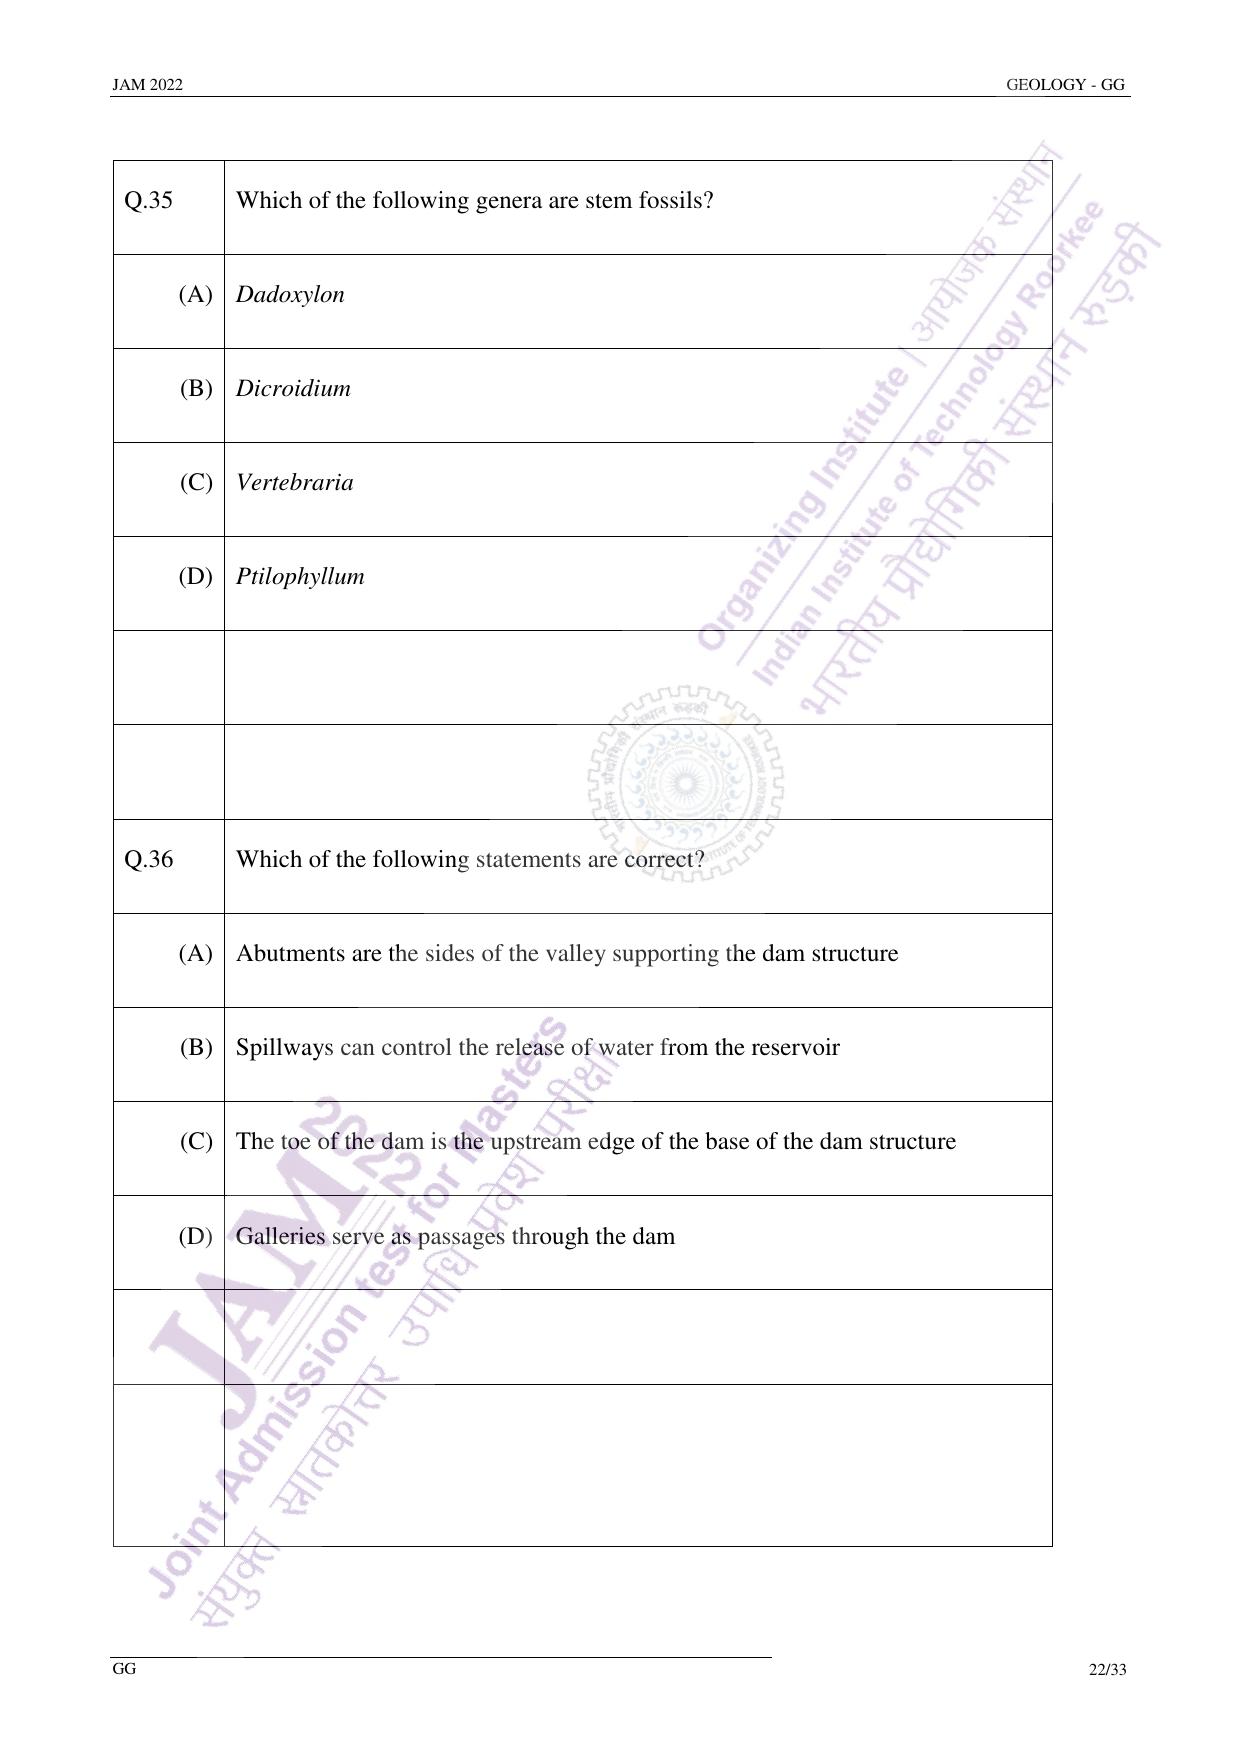 JAM 2022: GG Question Paper - Page 21